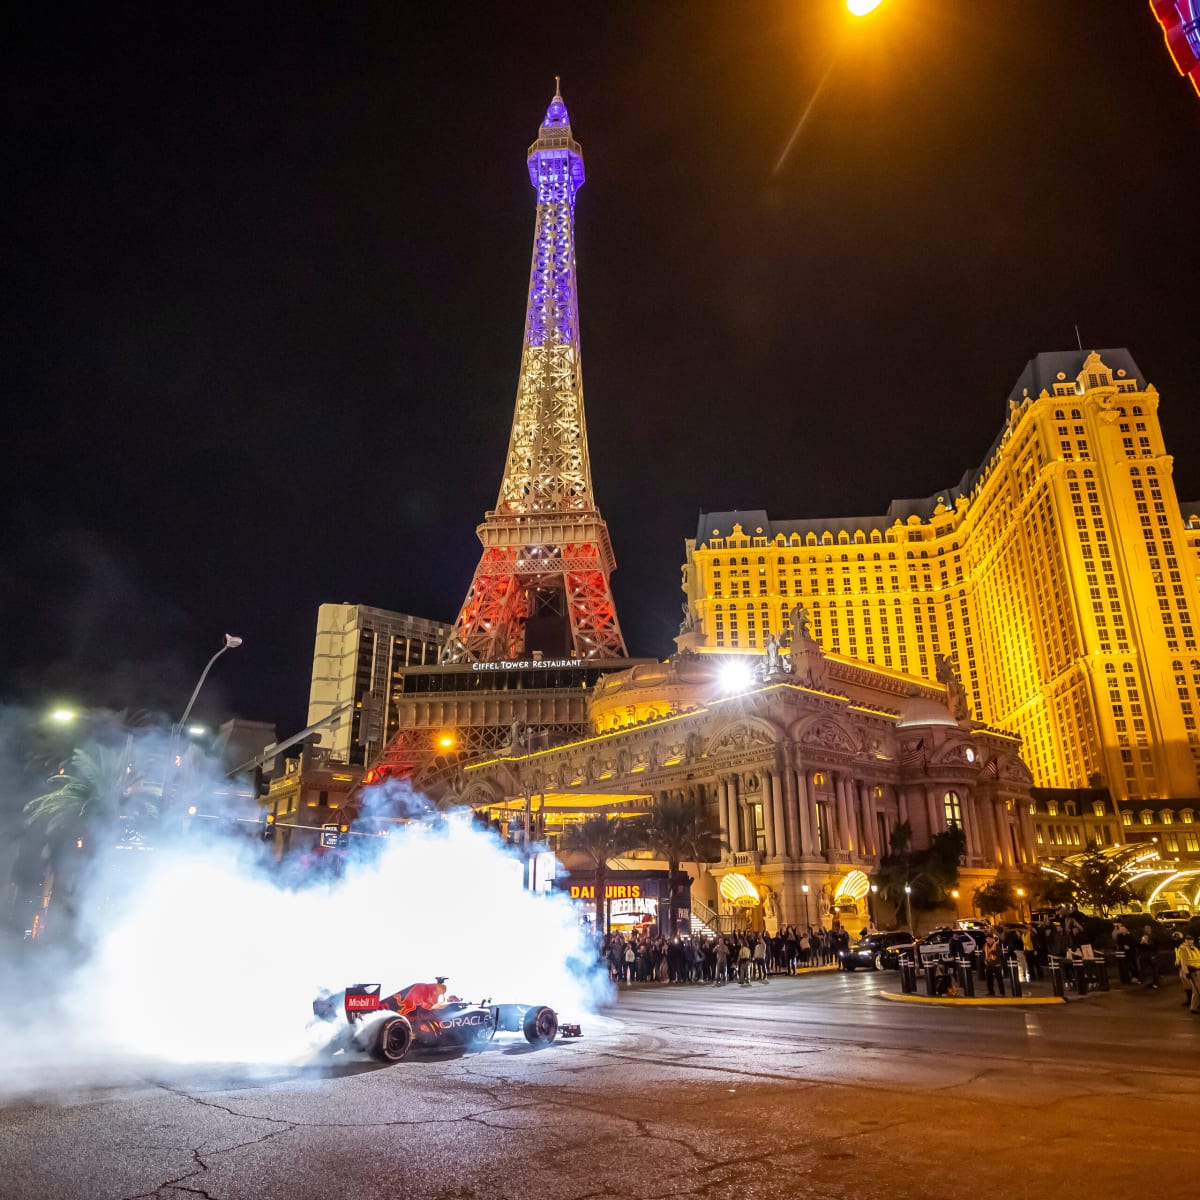 What's Driving You Crazy? – Repaving The Strip and nearby streets for the  Formula 1 Grand Prix later this year